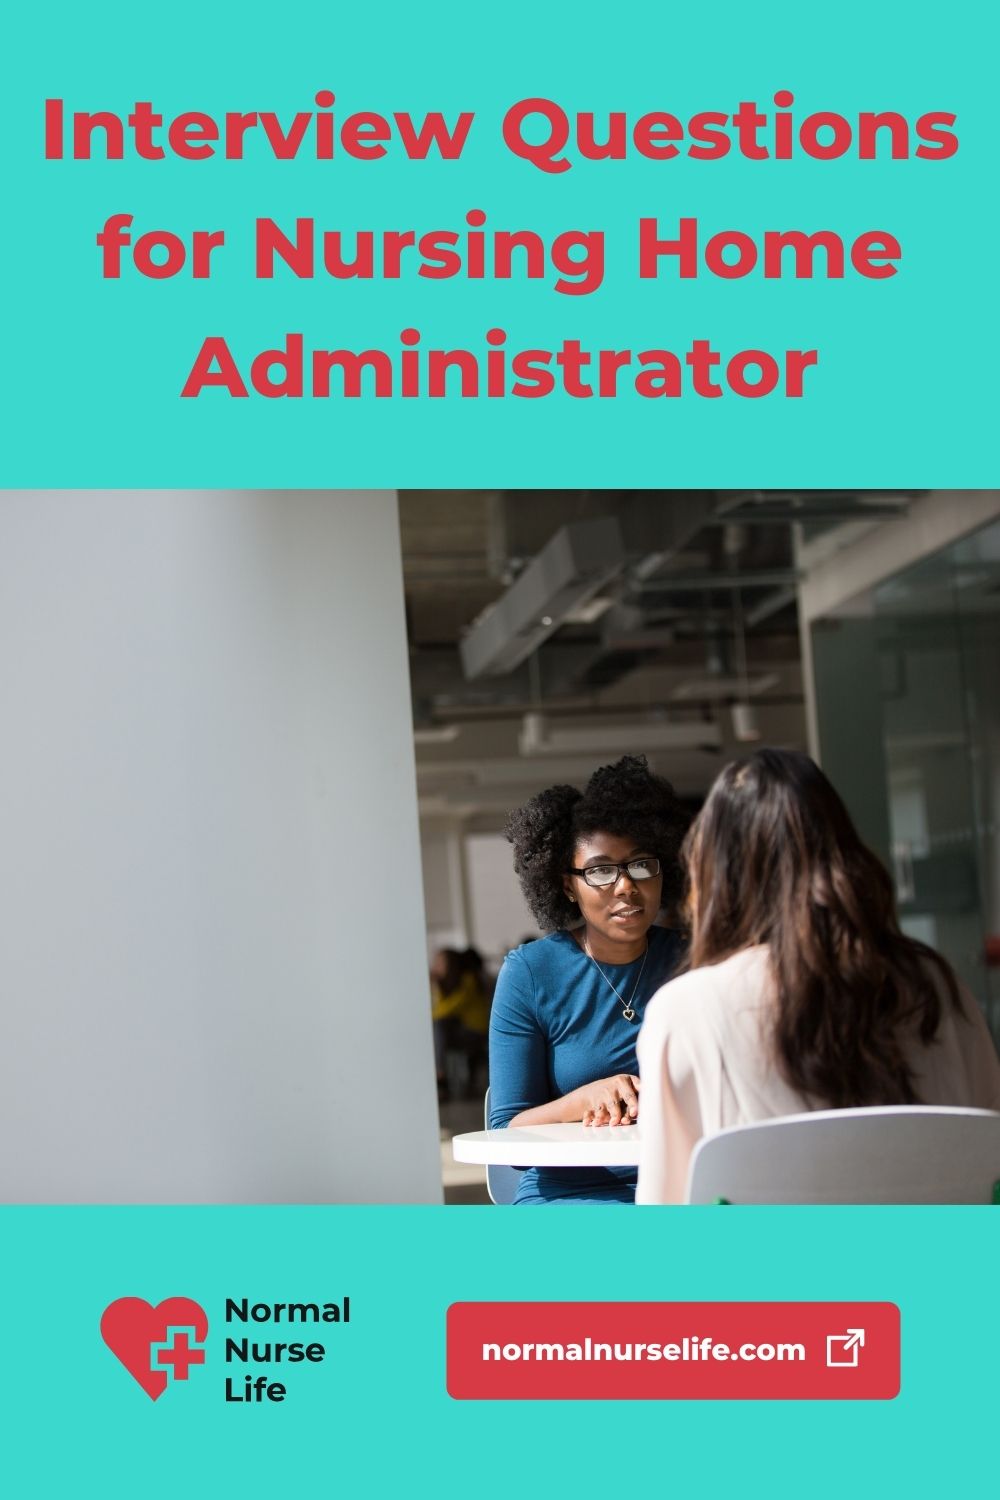 Nursing home administrator interview questions and answers